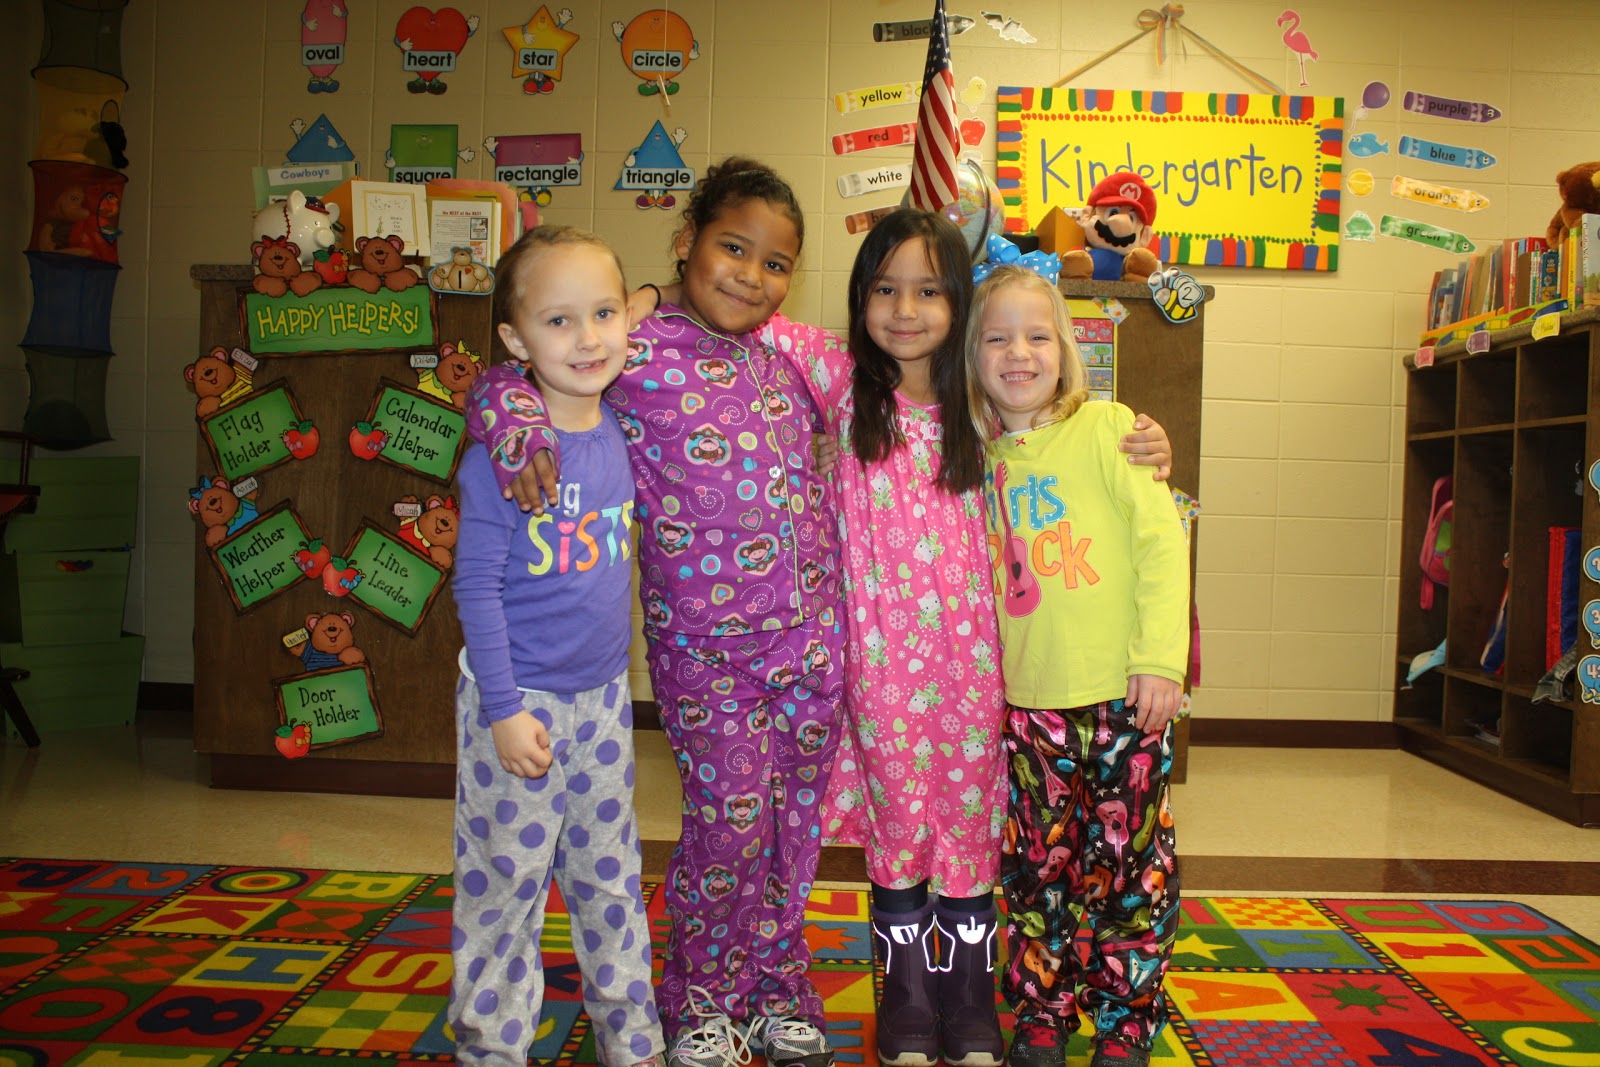 Ms. Marzoni's Class: Bears and Pajama Day!